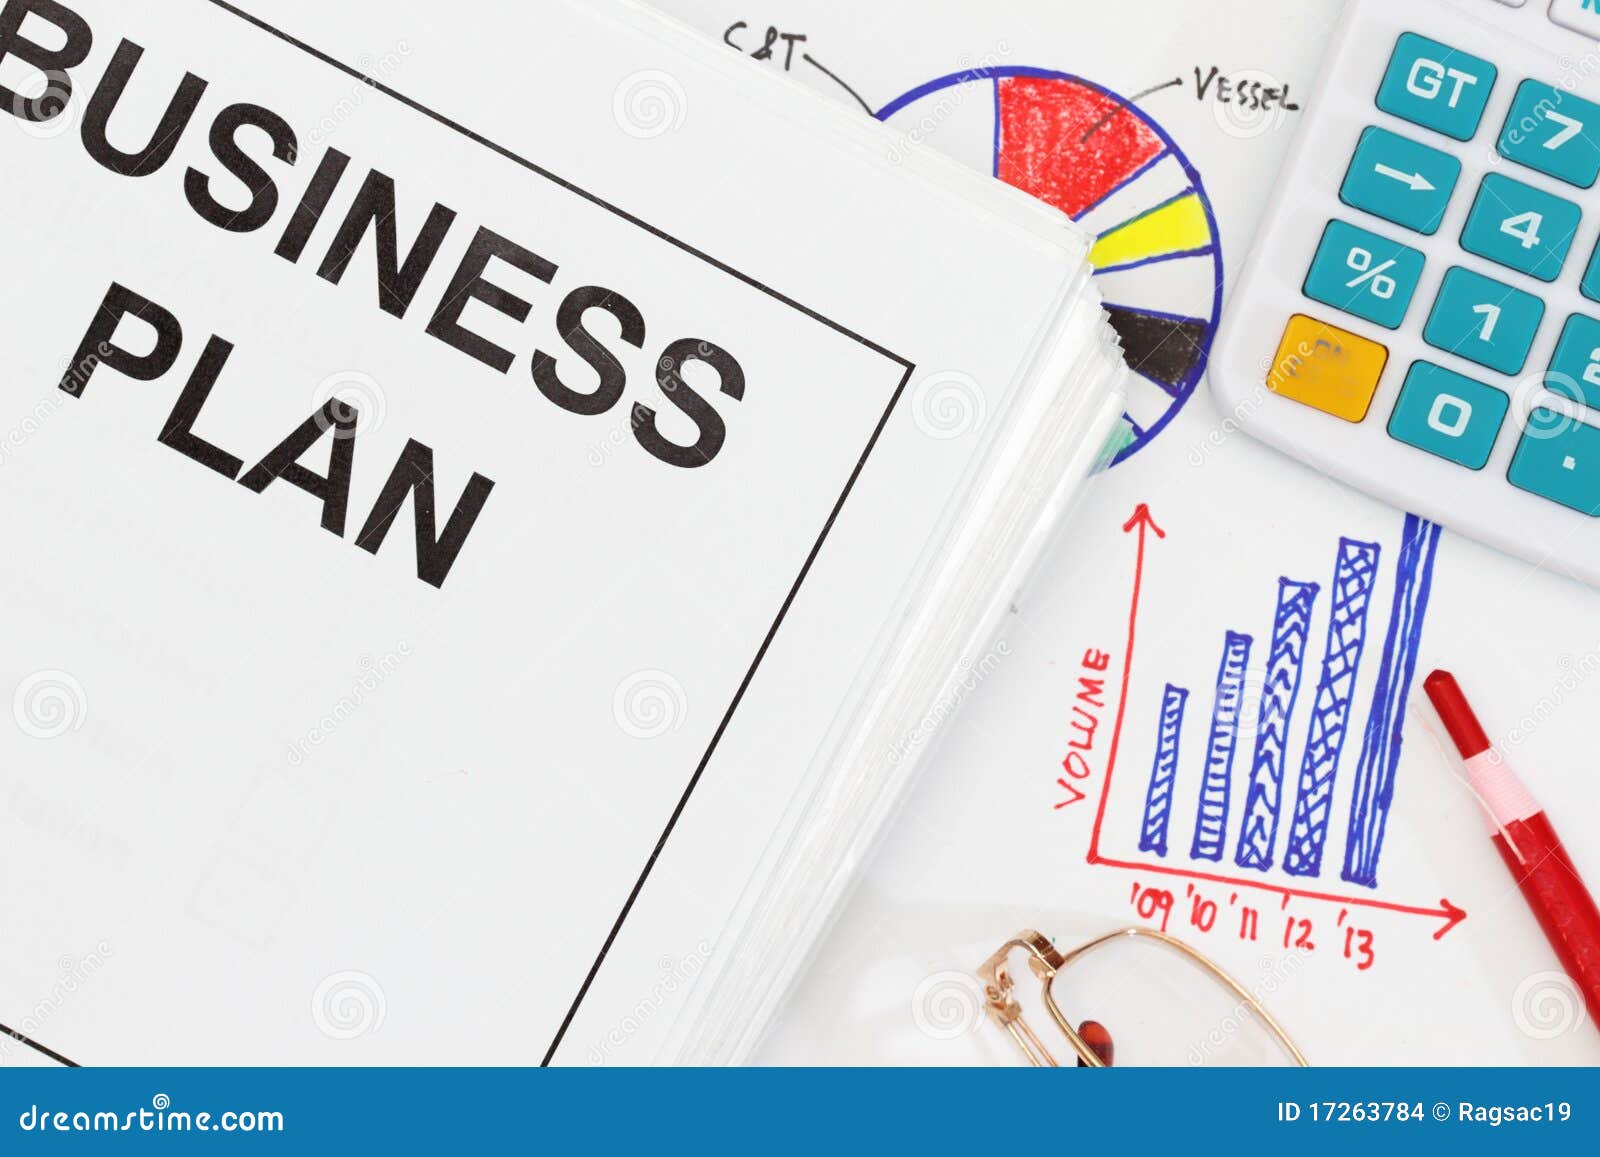 business plan stock images